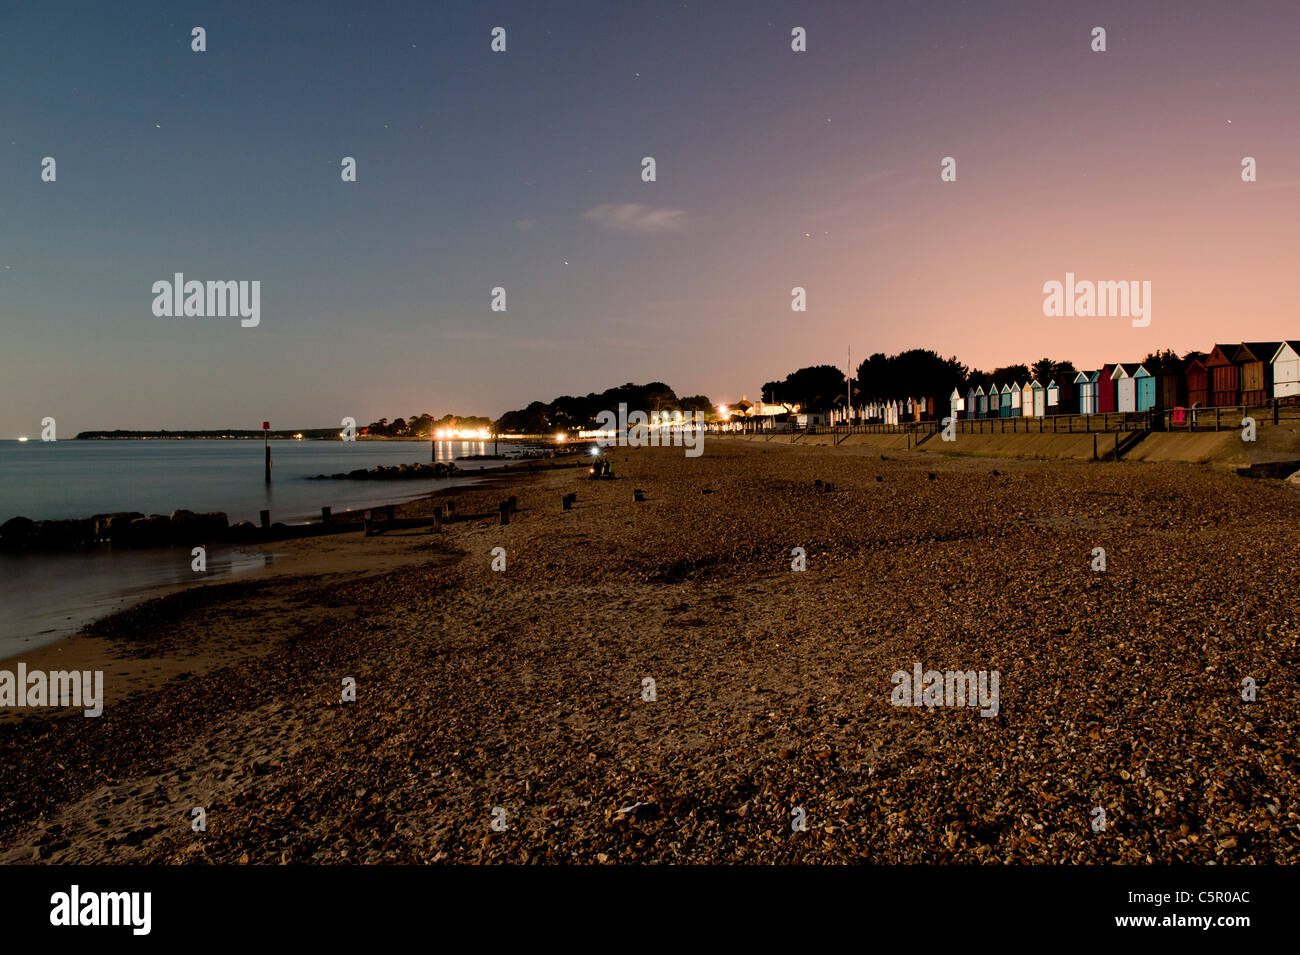 Beach huts are visible against a dimly lit night sky on a pebble beach near to Highcliffe, Dorset. Stock Photo